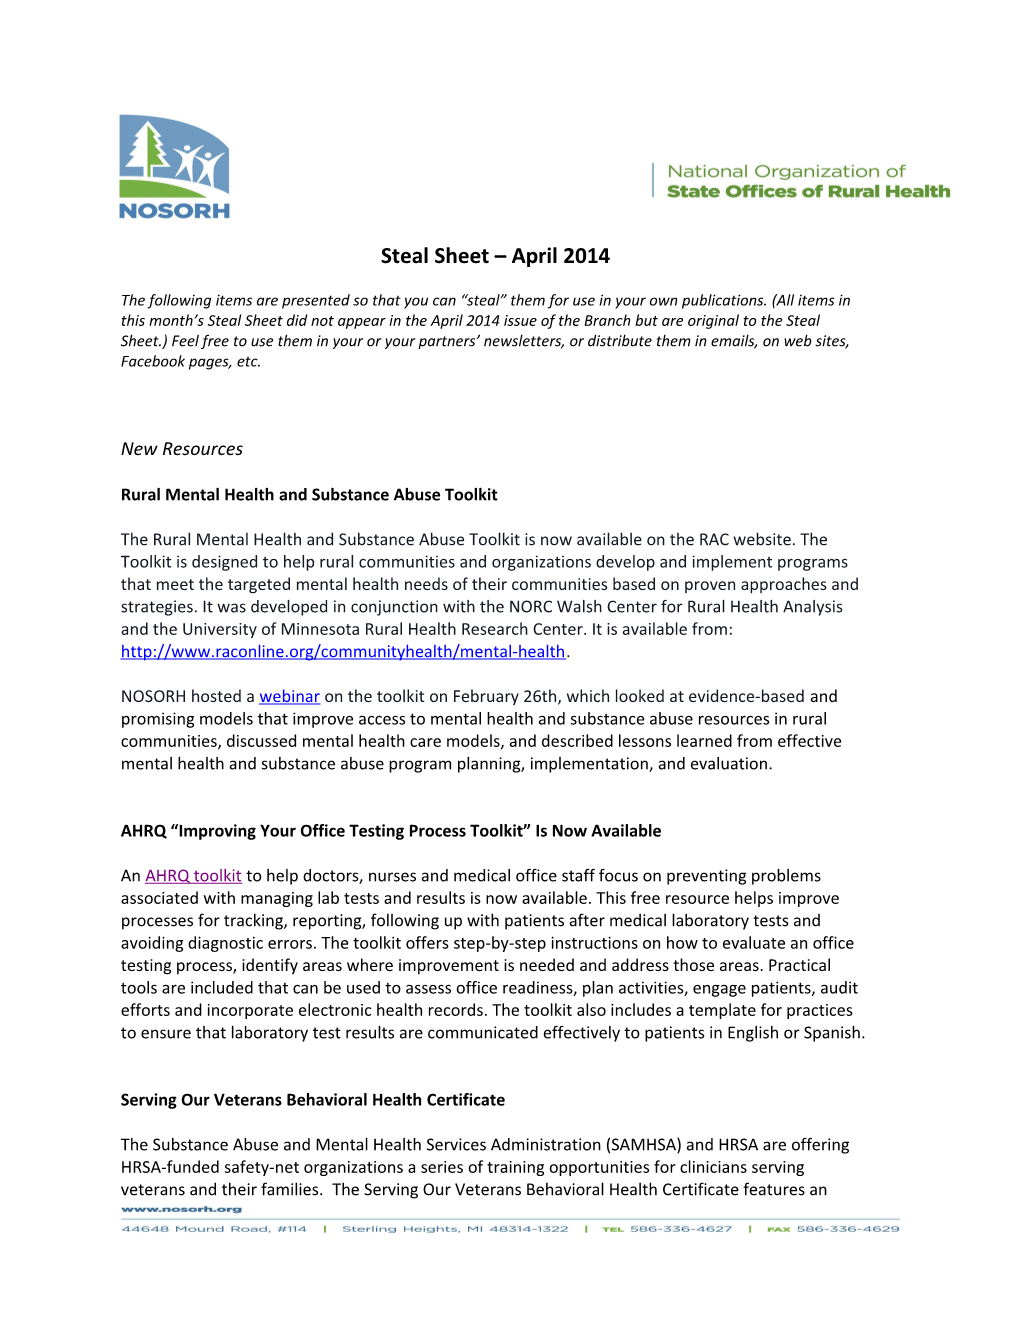 Rural Mental Health and Substance Abuse Toolkit